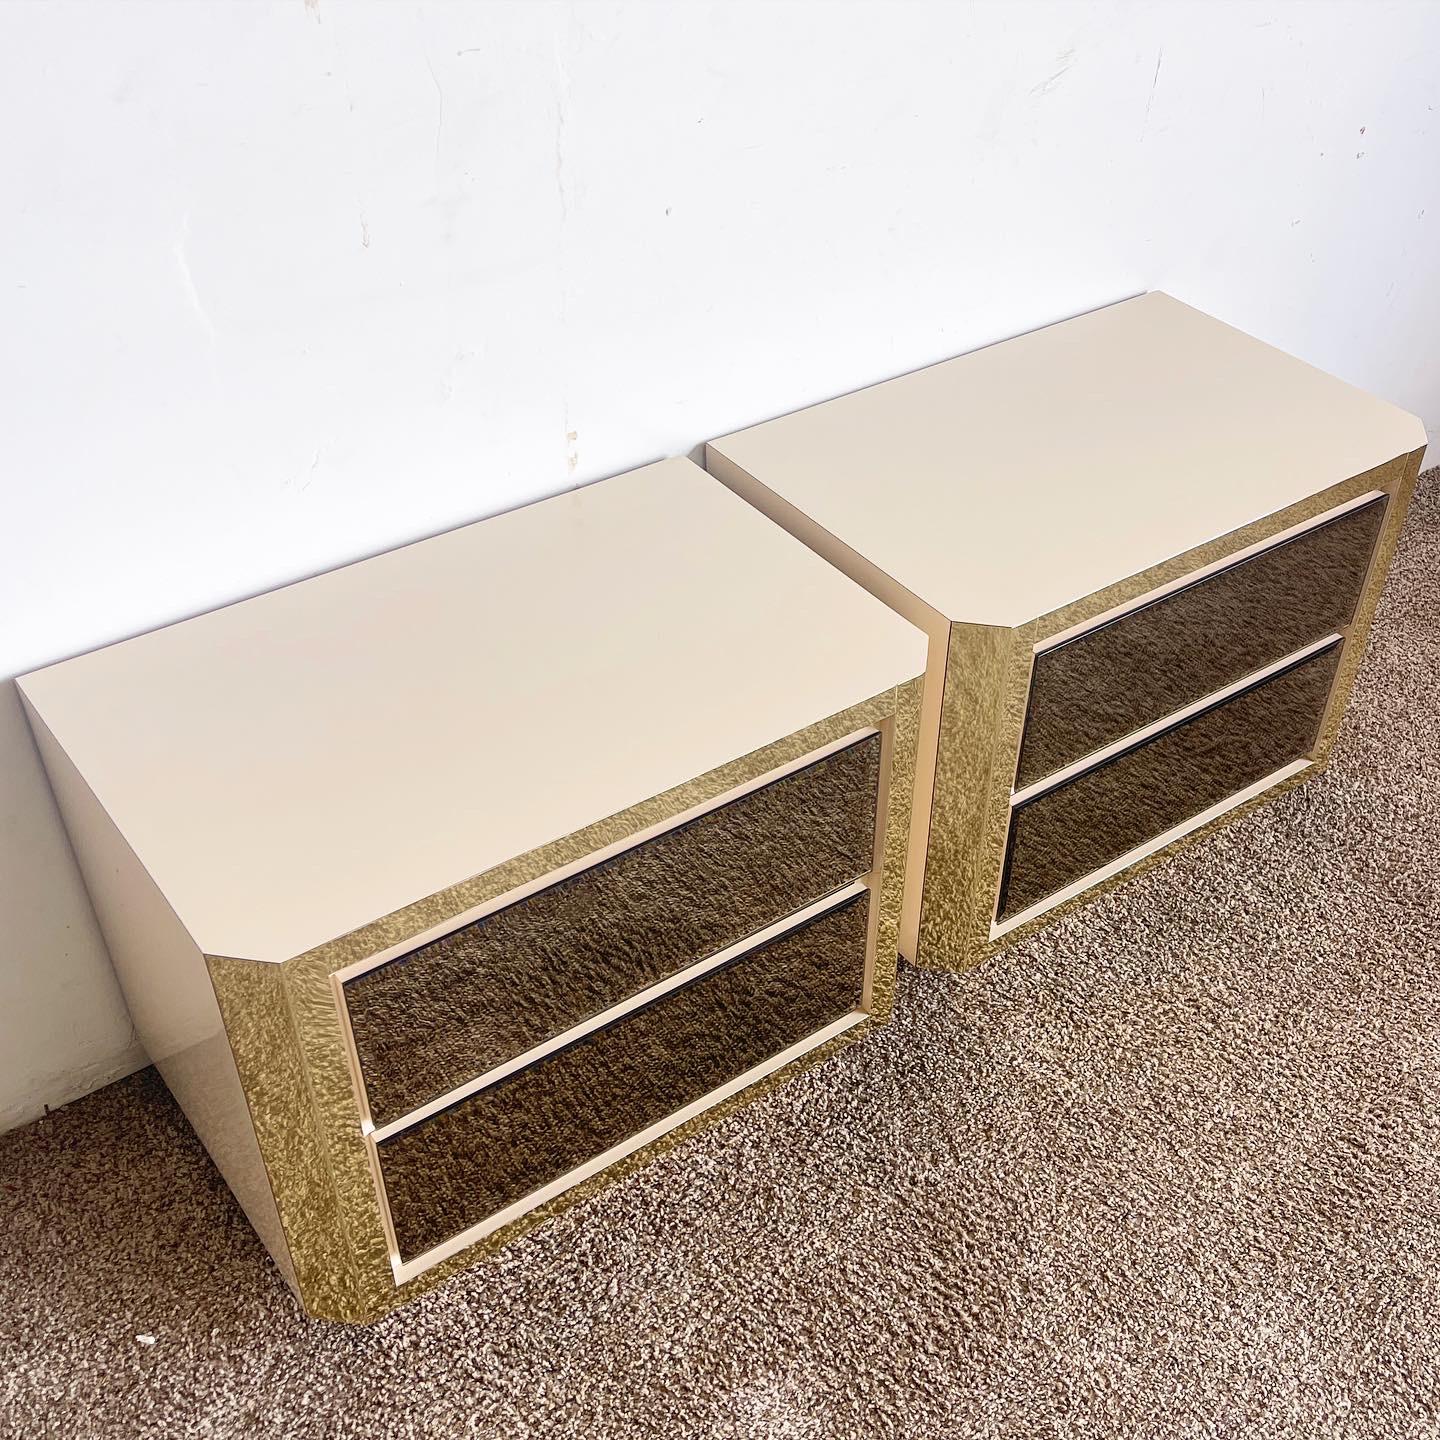 American Postmodern Beige Gold and Smoked Mirror Nightstands - a Pair For Sale